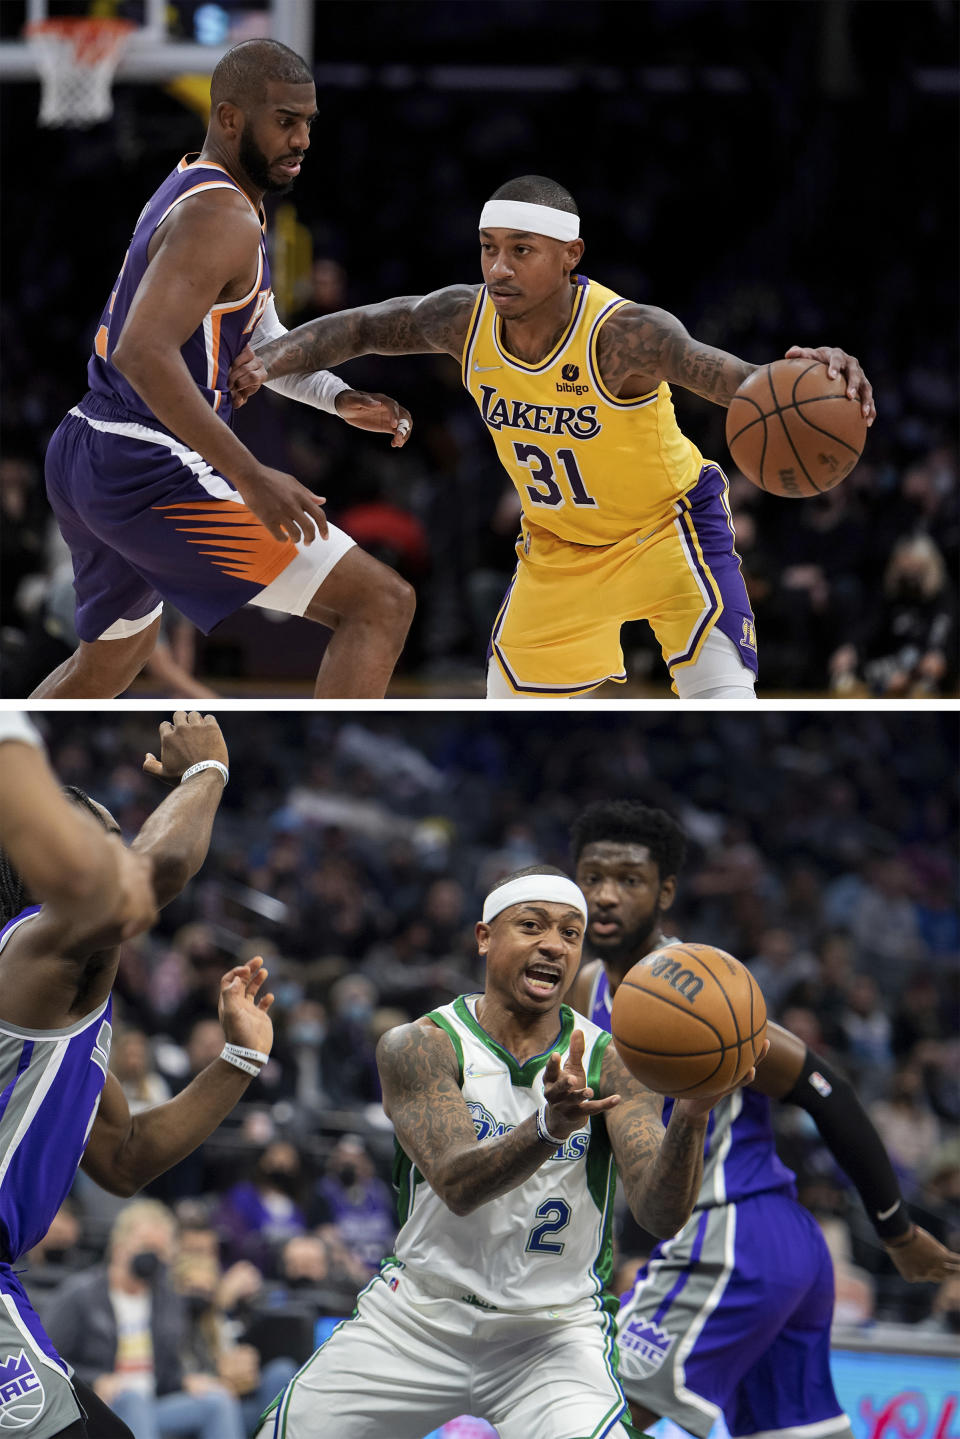 FILE - Top, Isaiah Thomas drives for the Los Angeles Lakers against Phoenix Suns' Chris Paul during the second half of an NBA basketball game Tuesday, Dec. 21, 2021, in Los Angeles. Bottom, Isaiah Thomas (2) plays for the Dallas Mavericks during the first quarter of an NBA basketball game in Sacramento, Calif., Wednesday, Dec. 29, 2021. It could be argued the untold MVP's of this season were the more than 100 players signed to short-term hardship contracts to fill in when almost every team was decimated by the Omicron variant and other virus issues in December and January. (AP Photo/File)